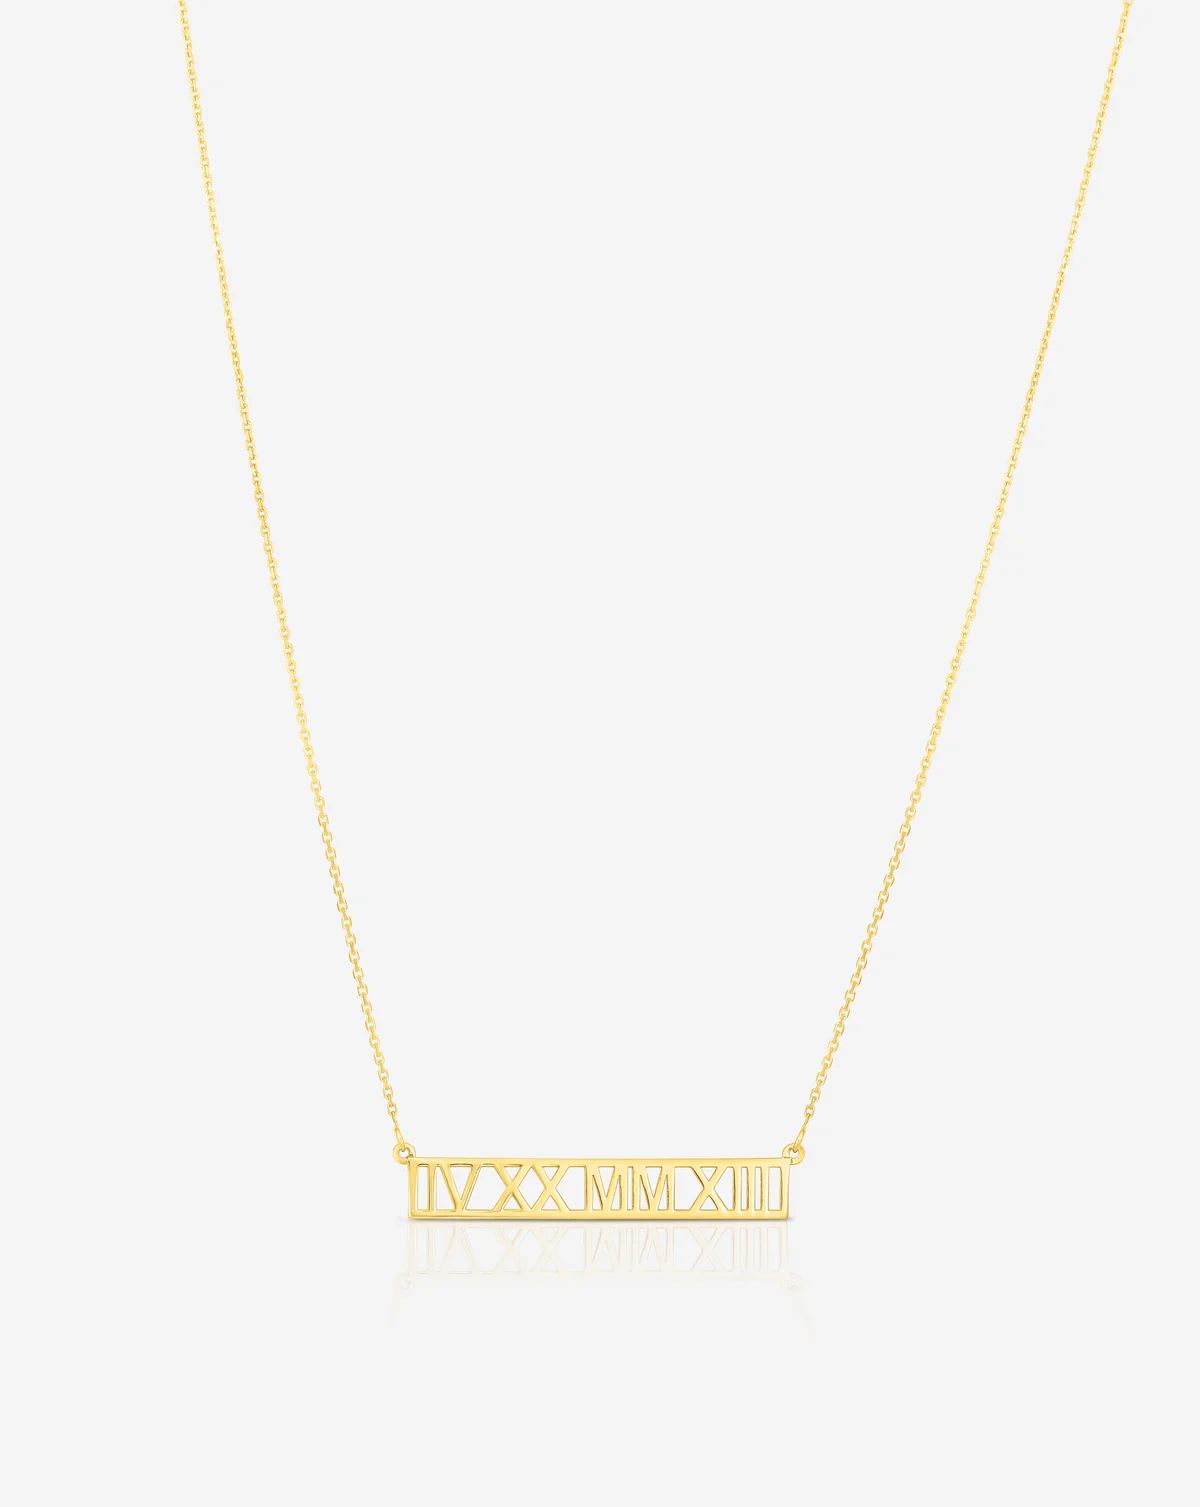 Personalized Roman Numeral Necklace | Ring Concierge